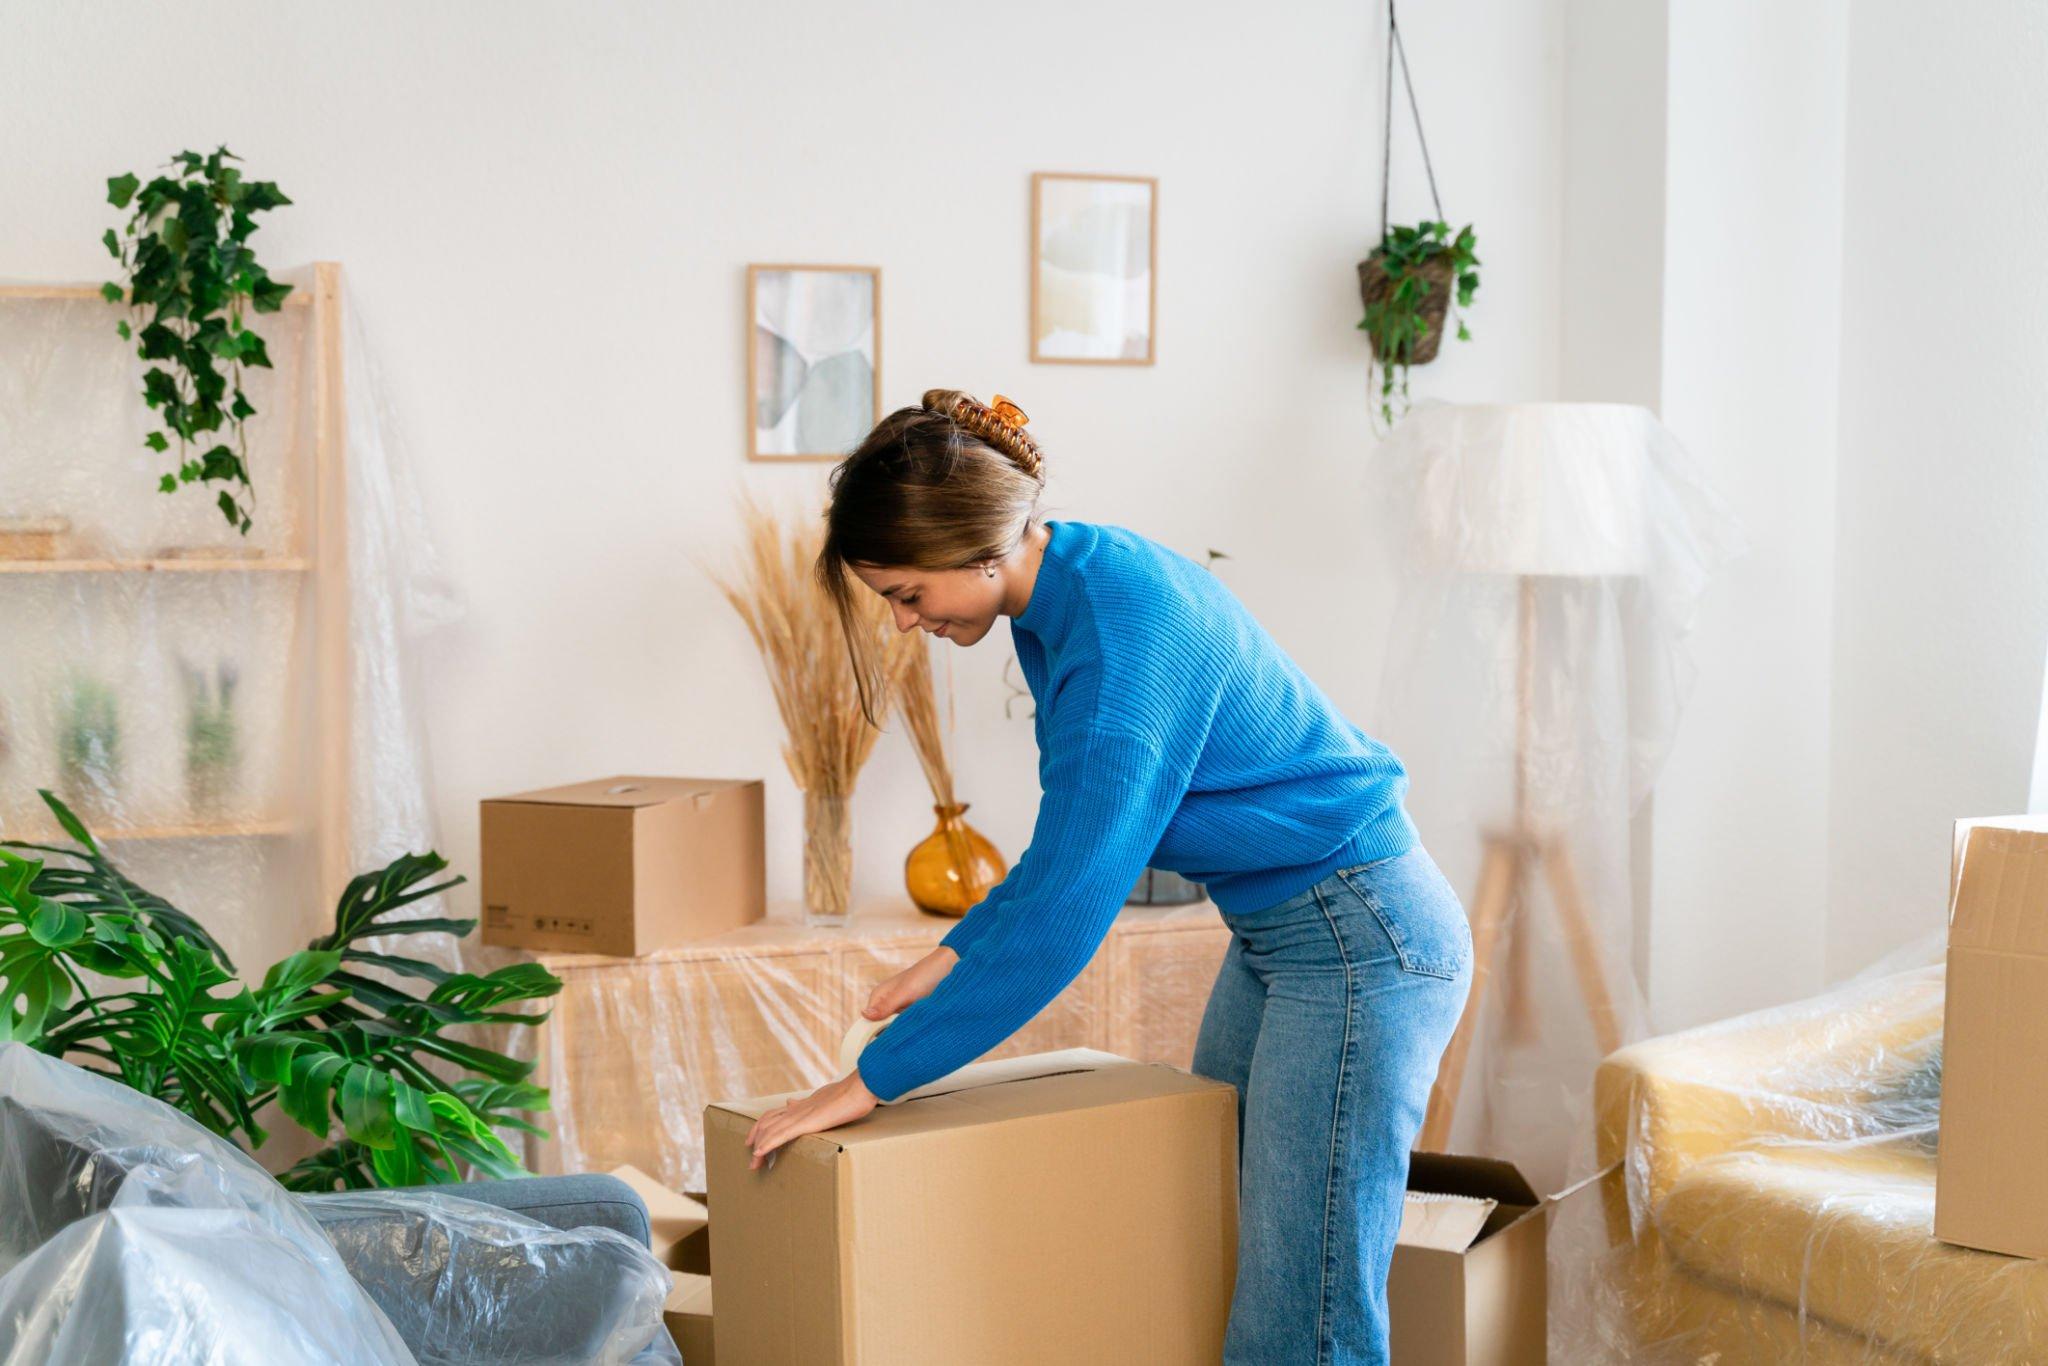 5 Reasons Why You Should Buy a Ready to Move in Property